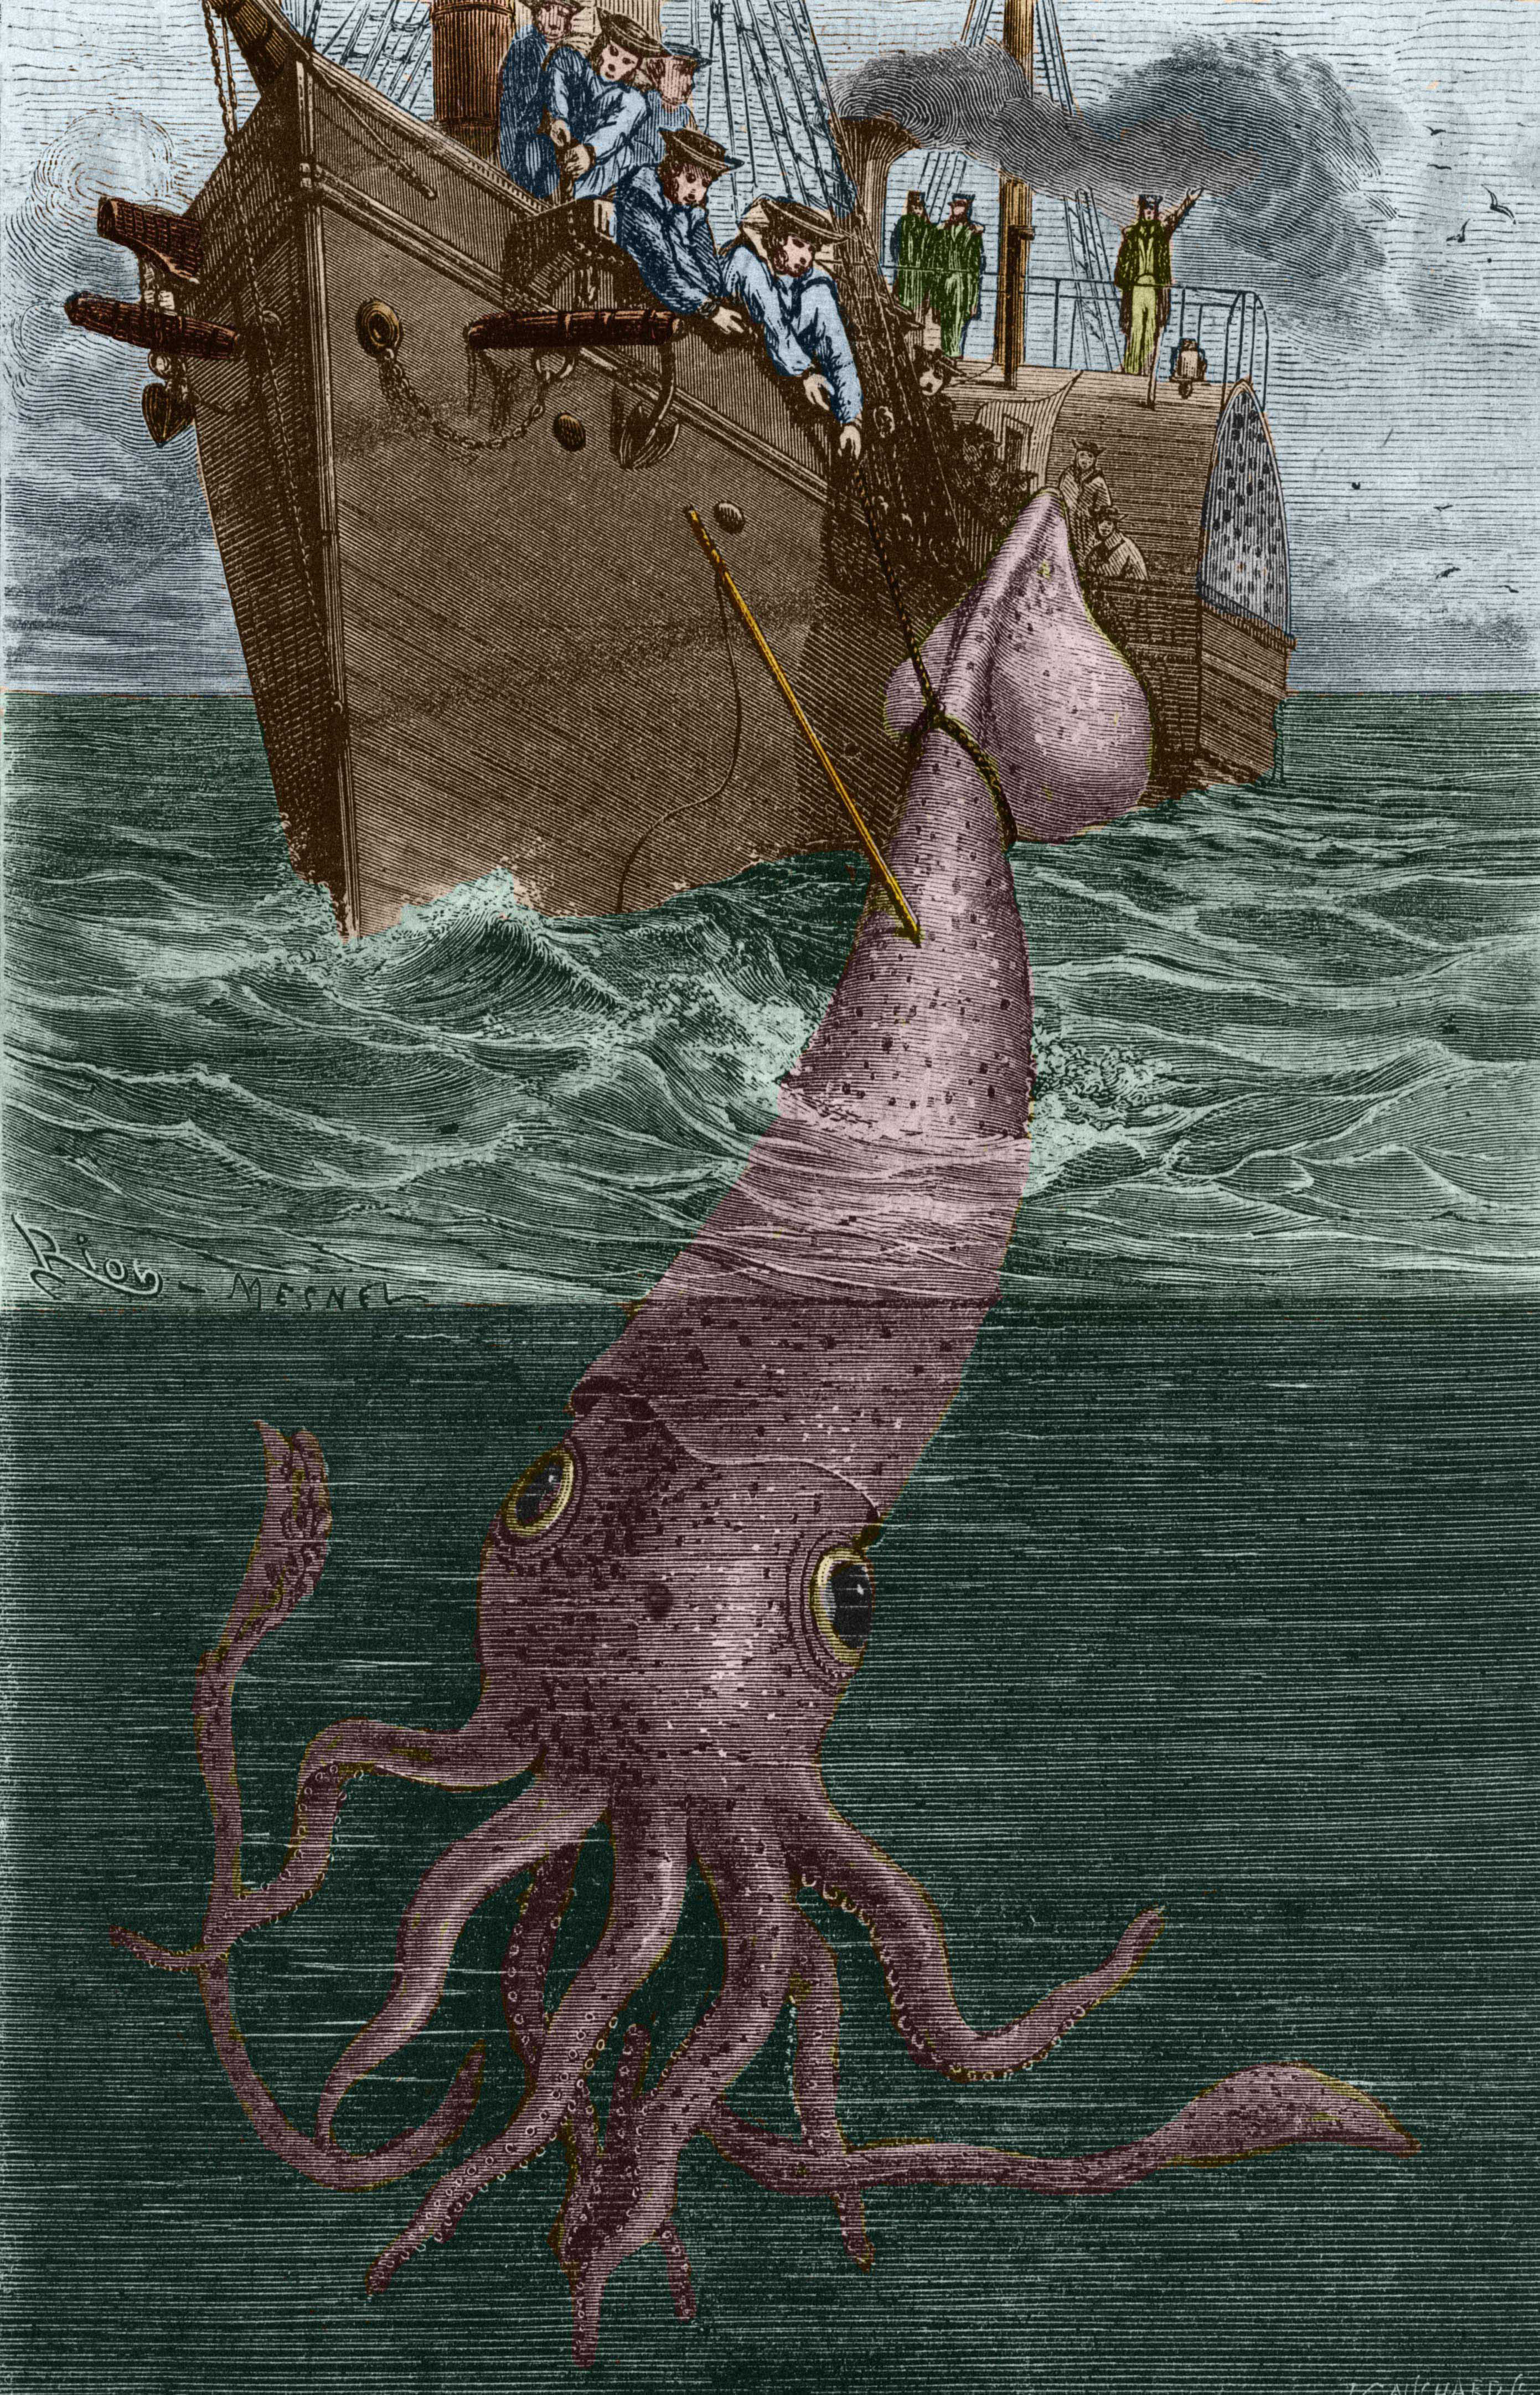 Illustration of the Crew of the Alecton Attempting to Catch a Giant Squid